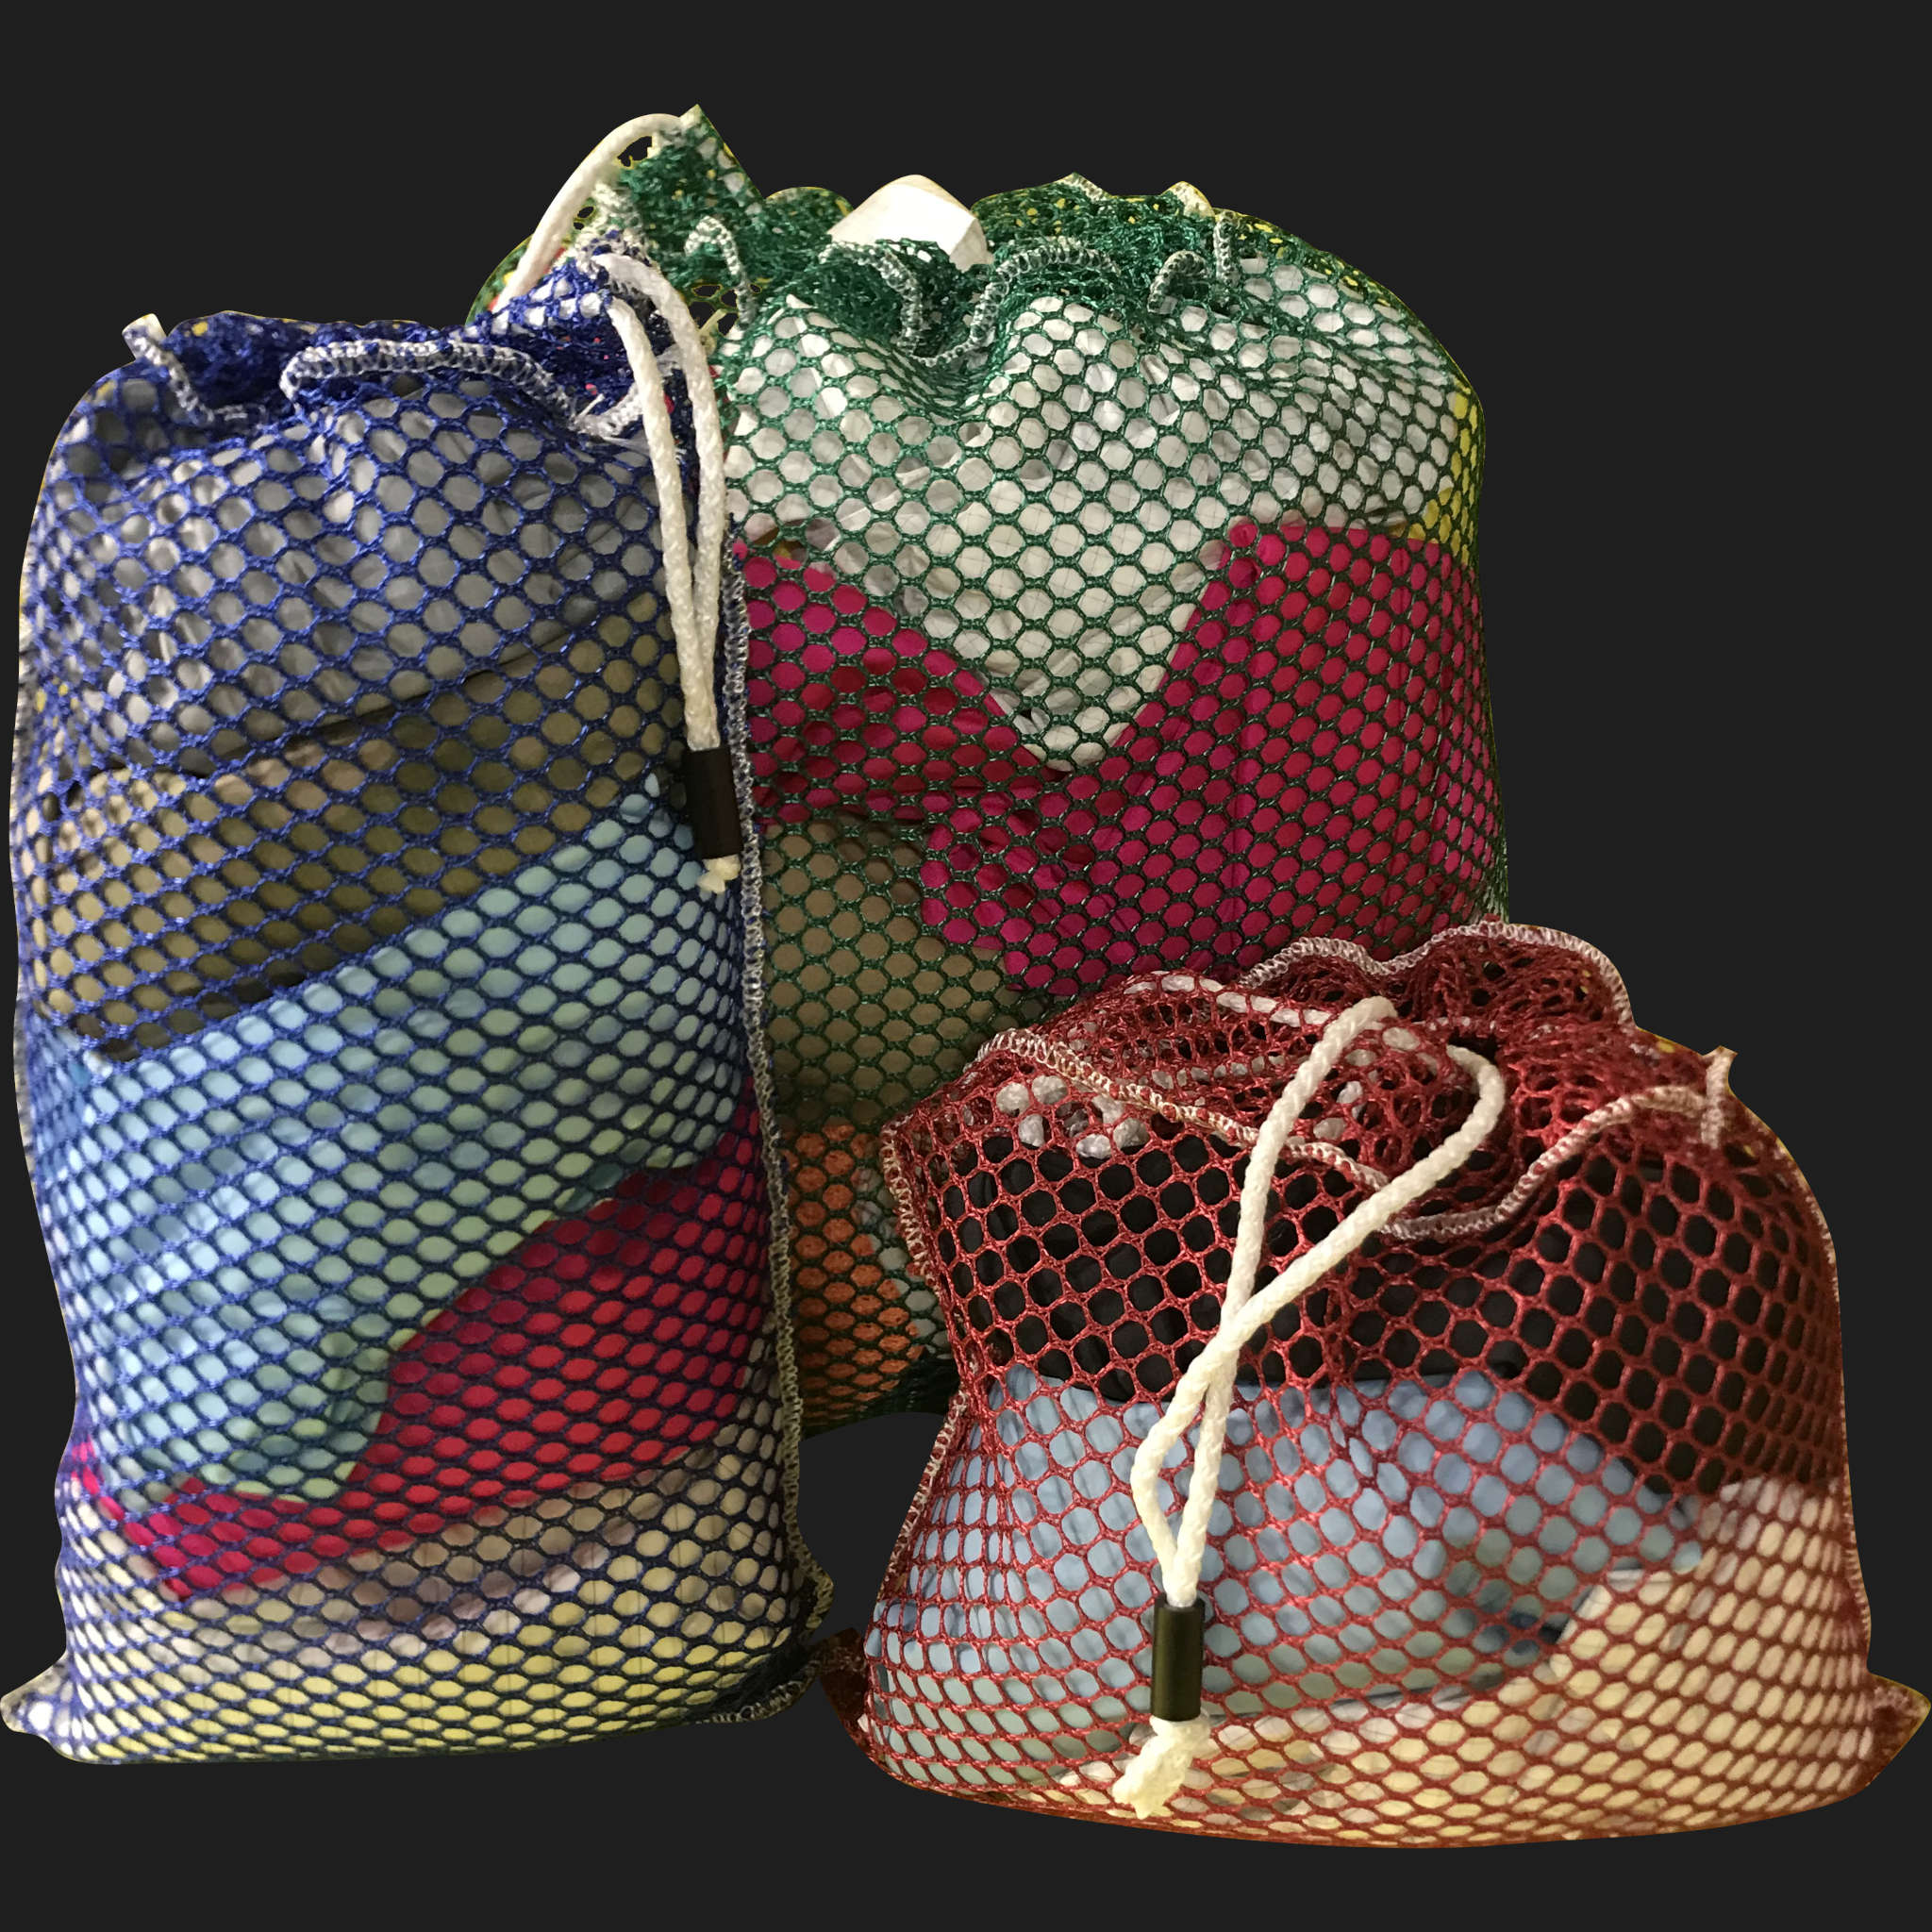 36" x 64" Customized Mesh-Net-Laundry Bags Heavy Duty with Cord and barrellock closure